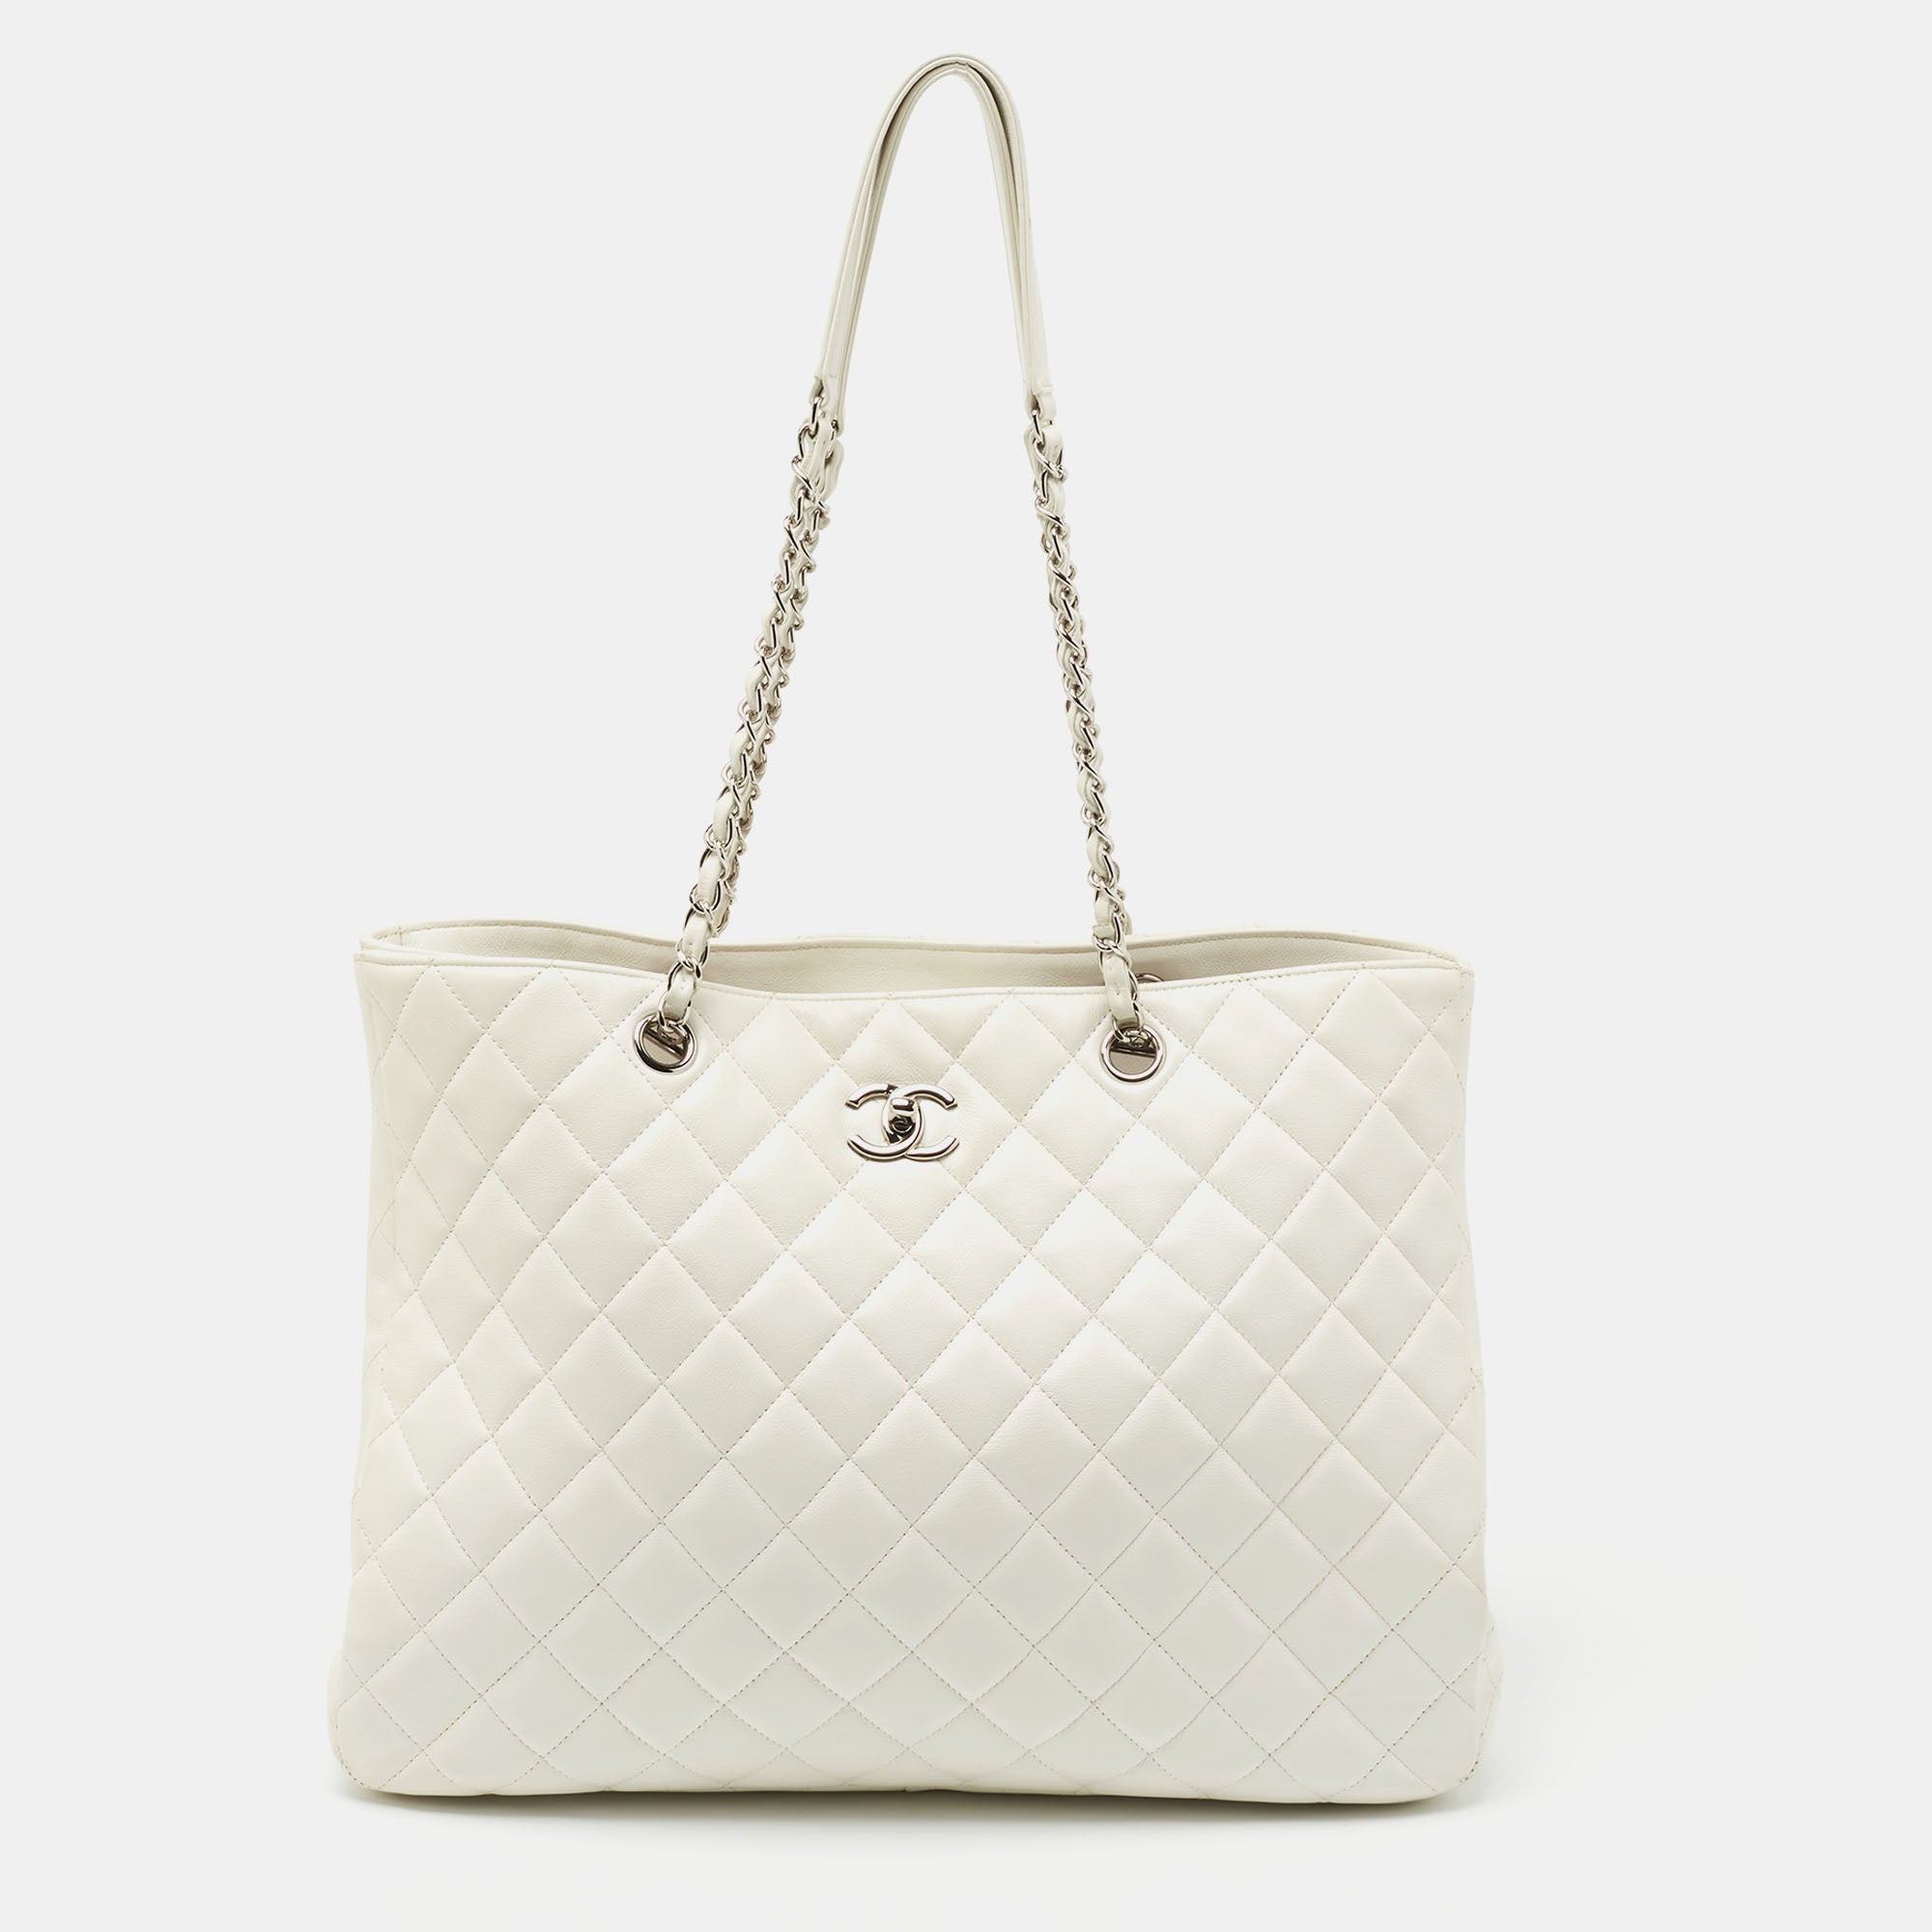 white chanel quilted purse handbag